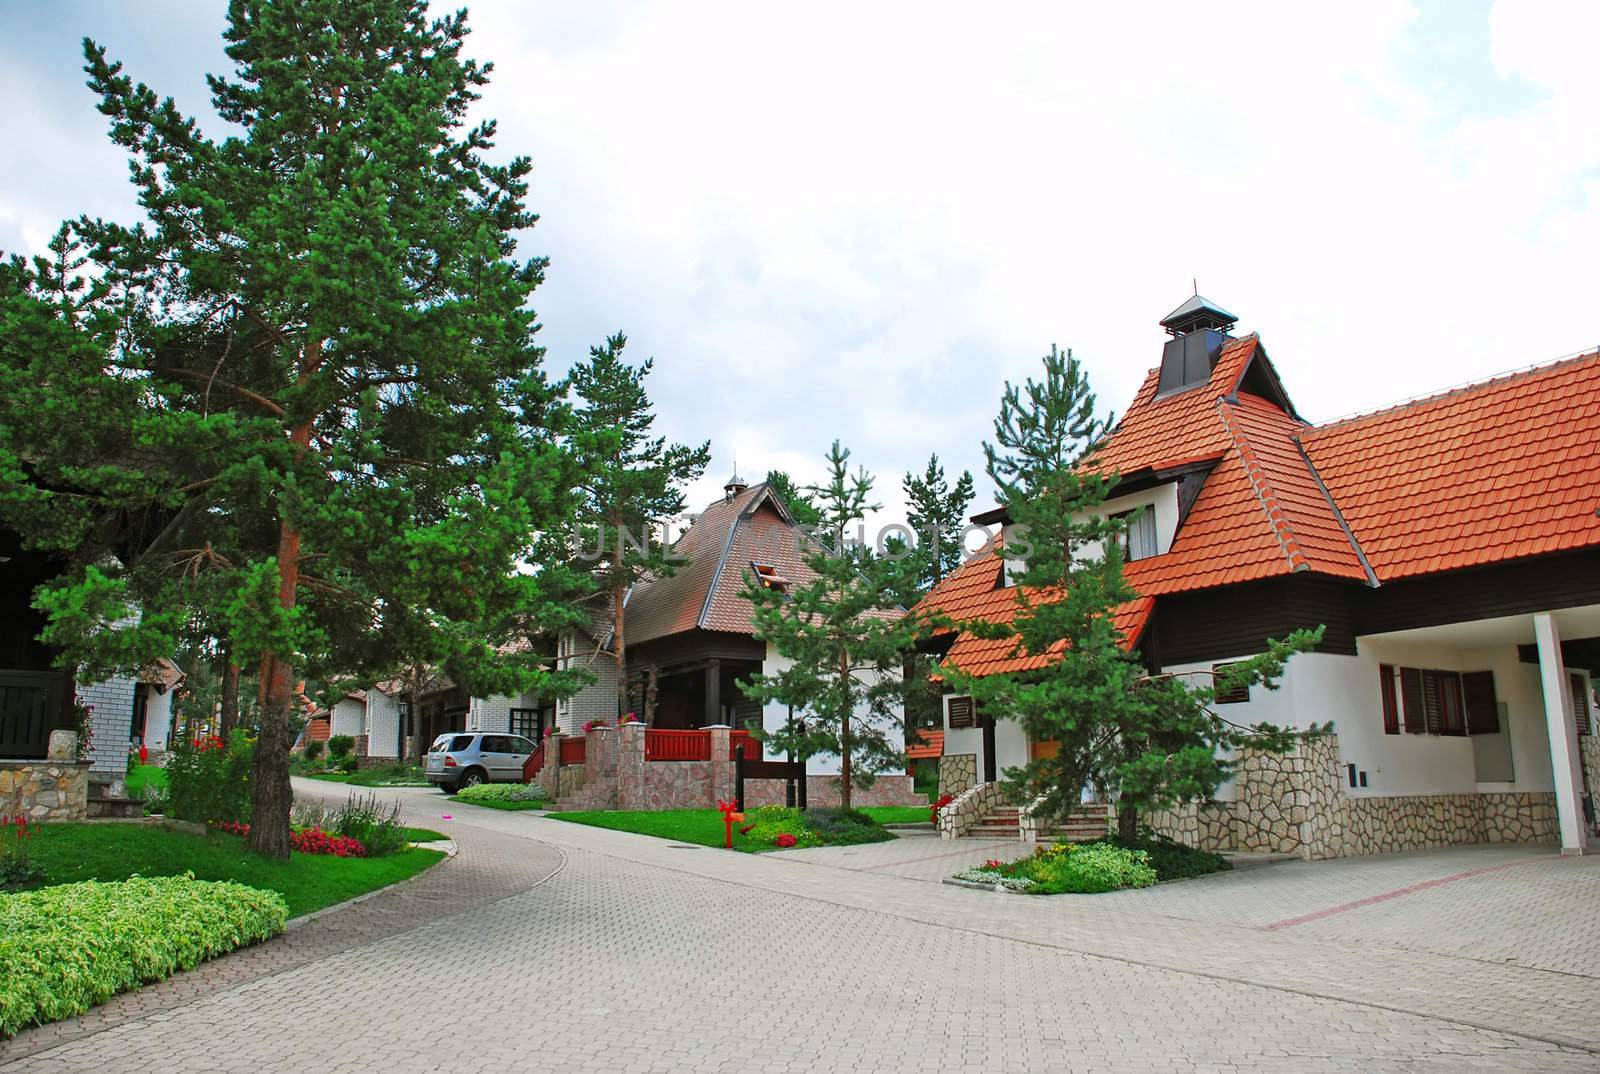 weekend houses with gardens and stone road in Serbia, Zlatibor